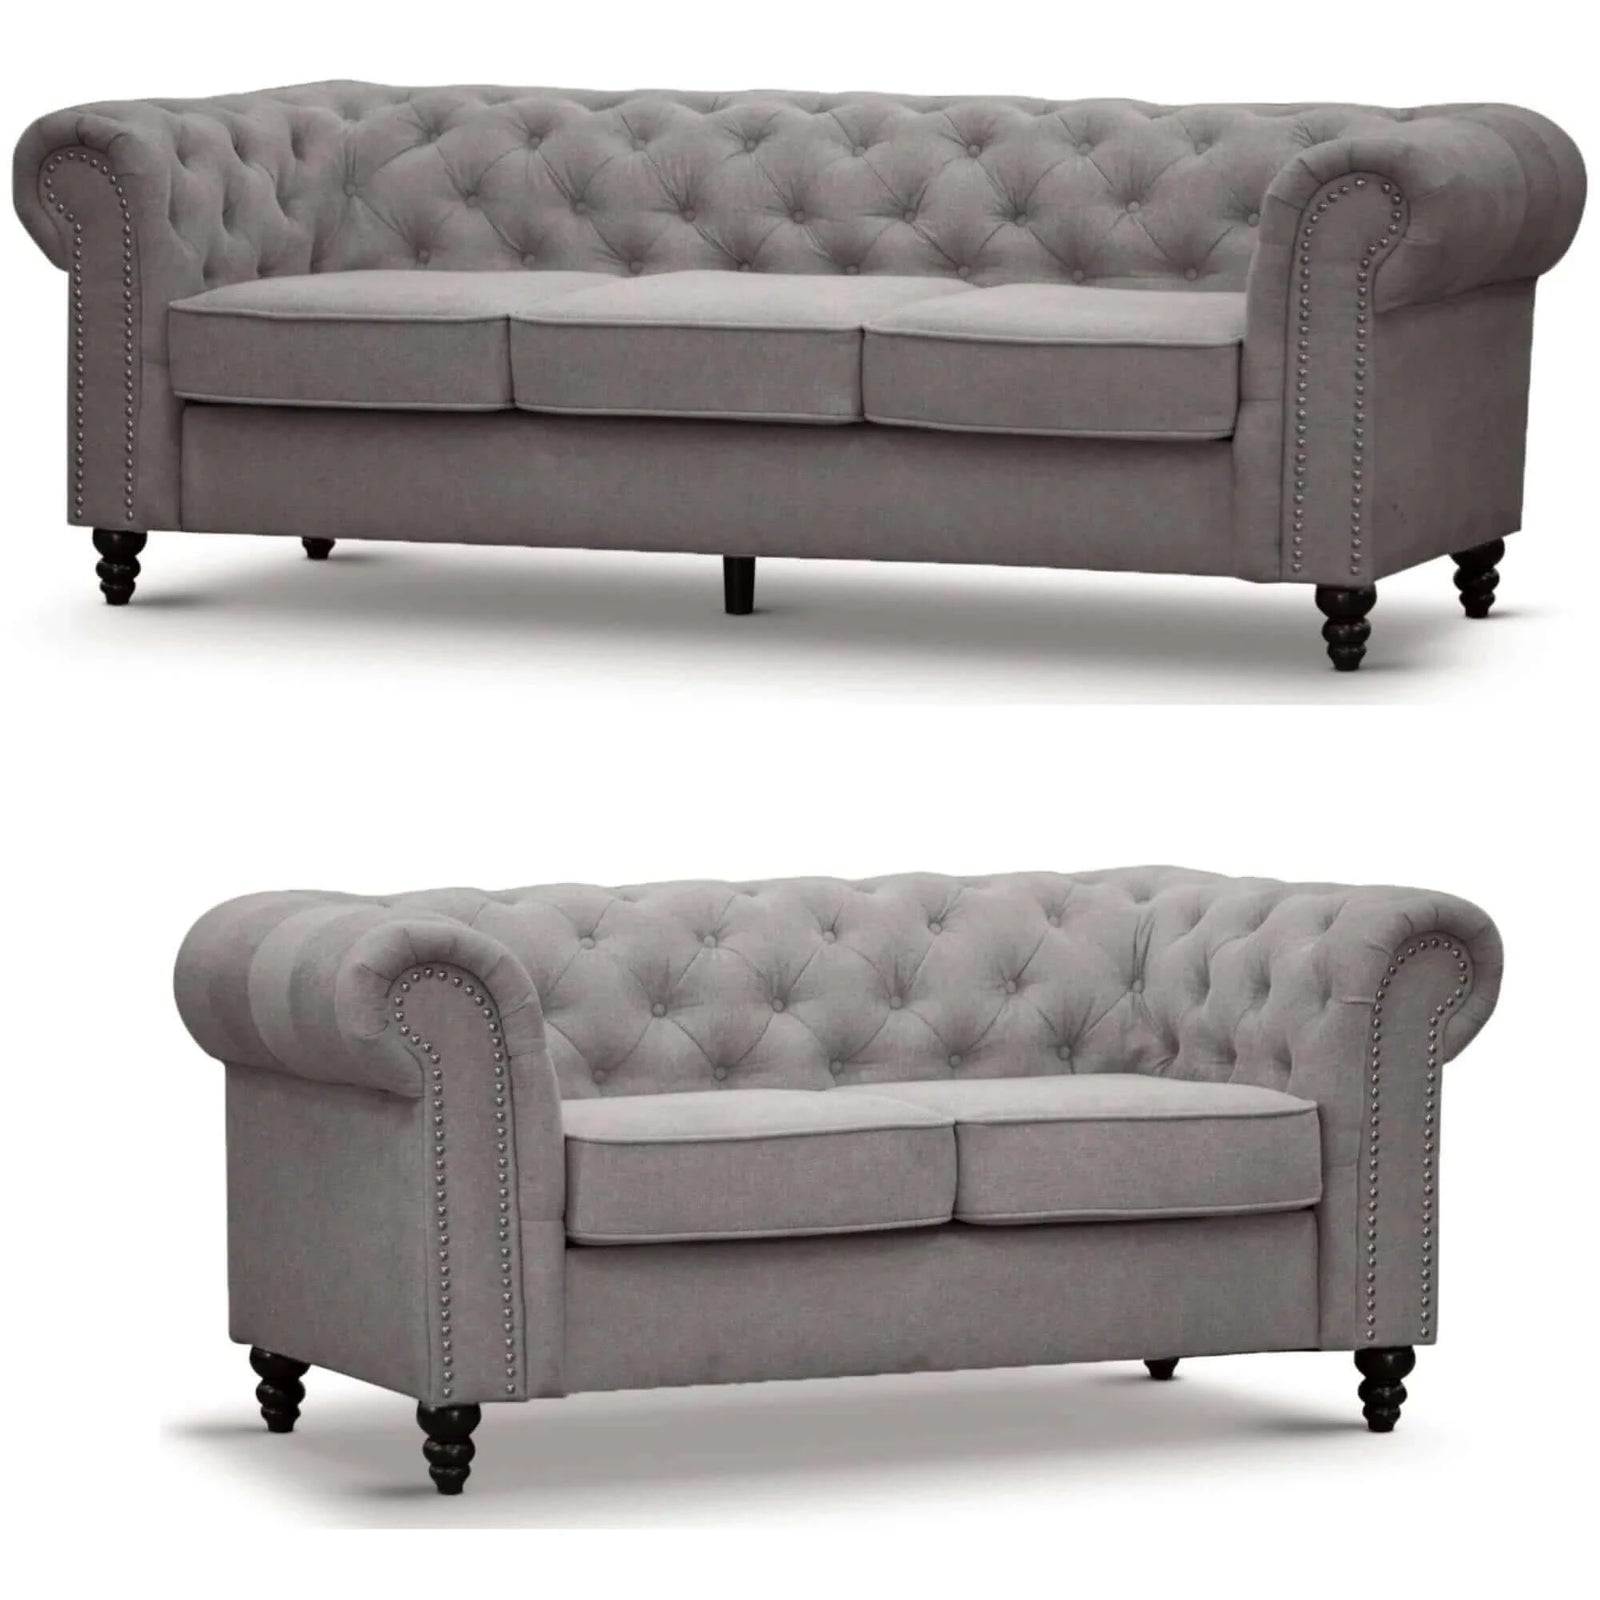 Buy mellowly 3 + 2 seater sofa fabric uplholstered chesterfield lounge couch - grey - upinteriors-Upinteriors